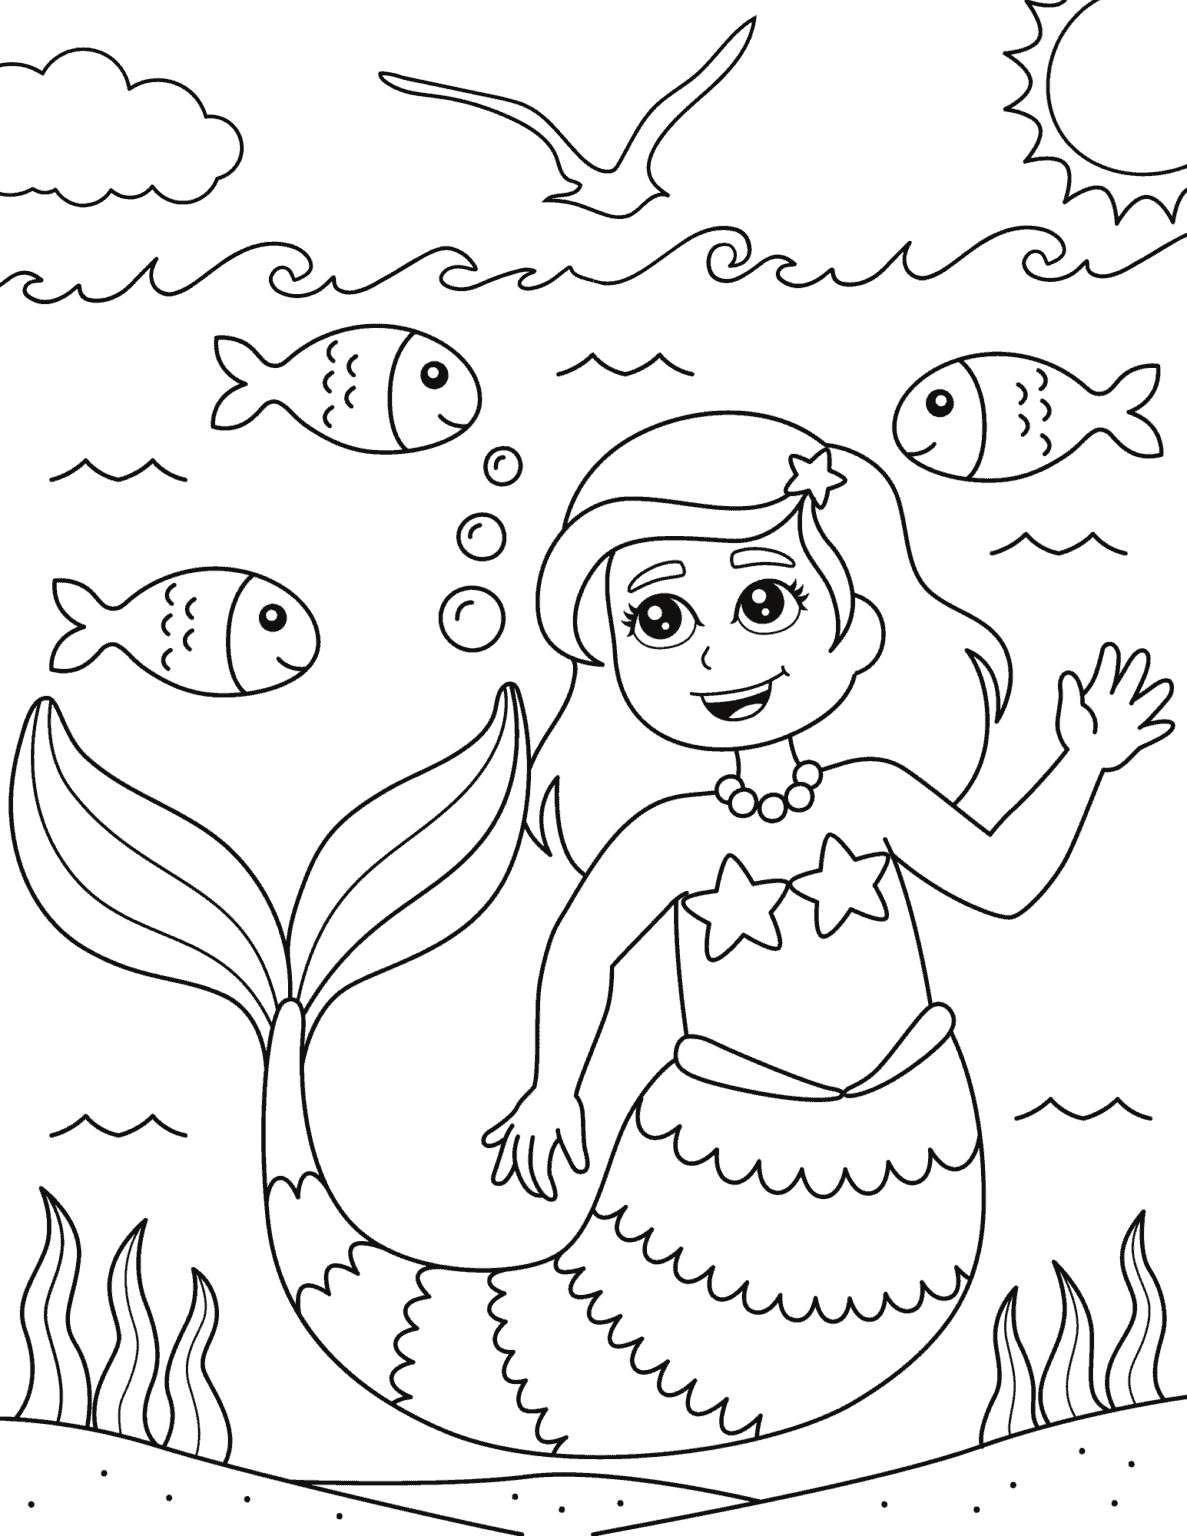 20 Free Printable Mermaid Coloring Pages for Kids - Prudent Penny Pincher